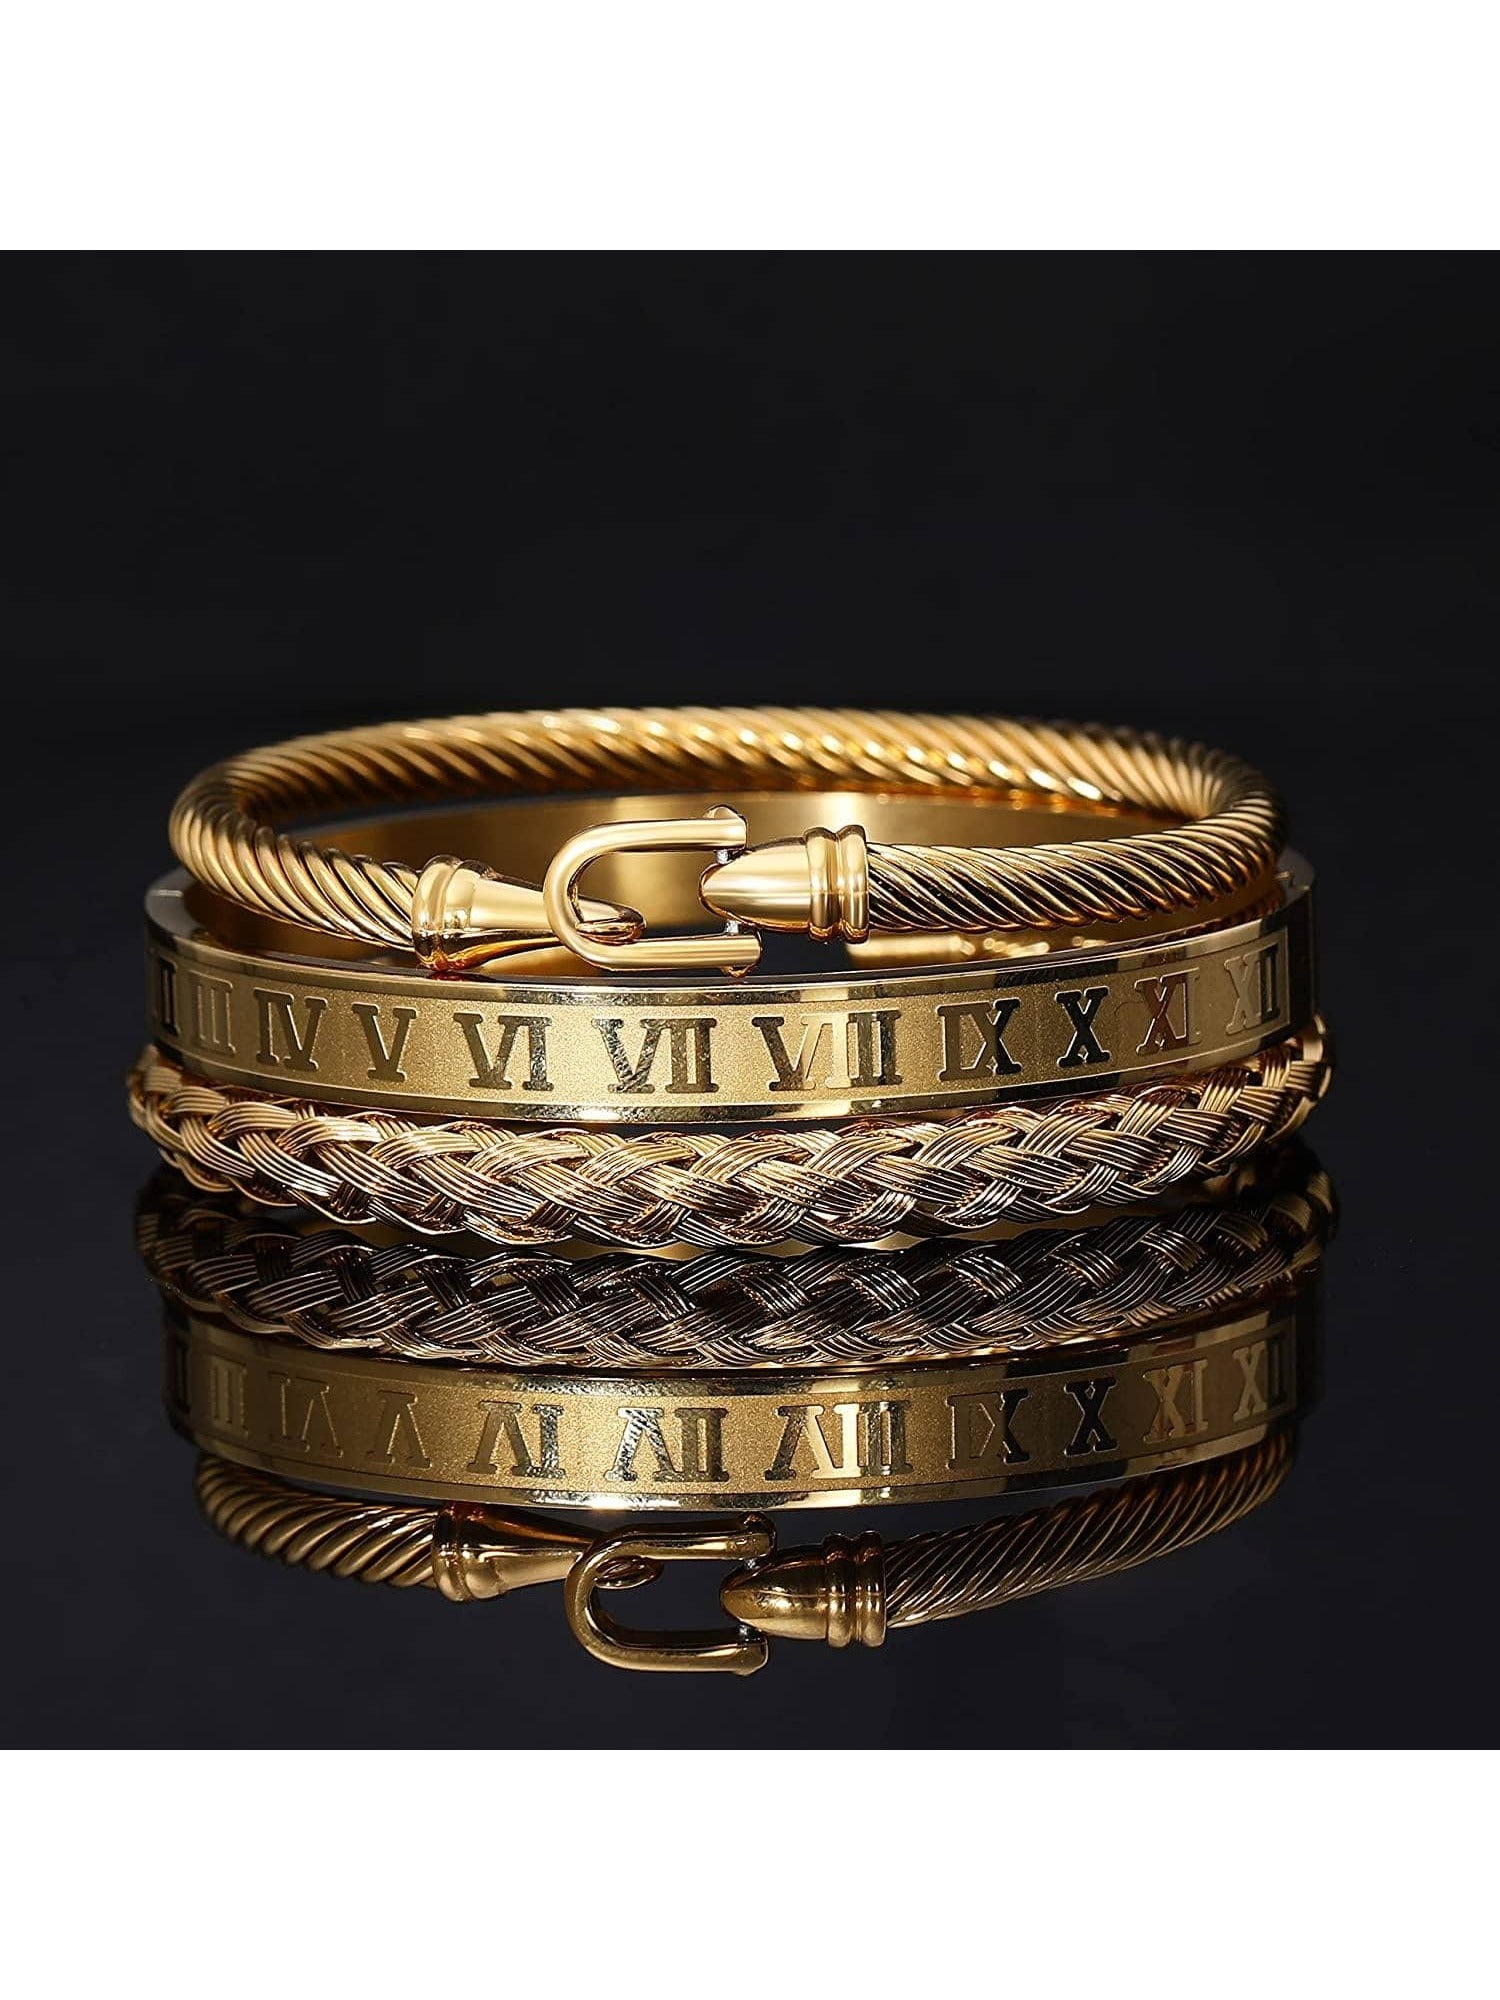 Bracelet and bangle with golden Roman numeral design3 pieces